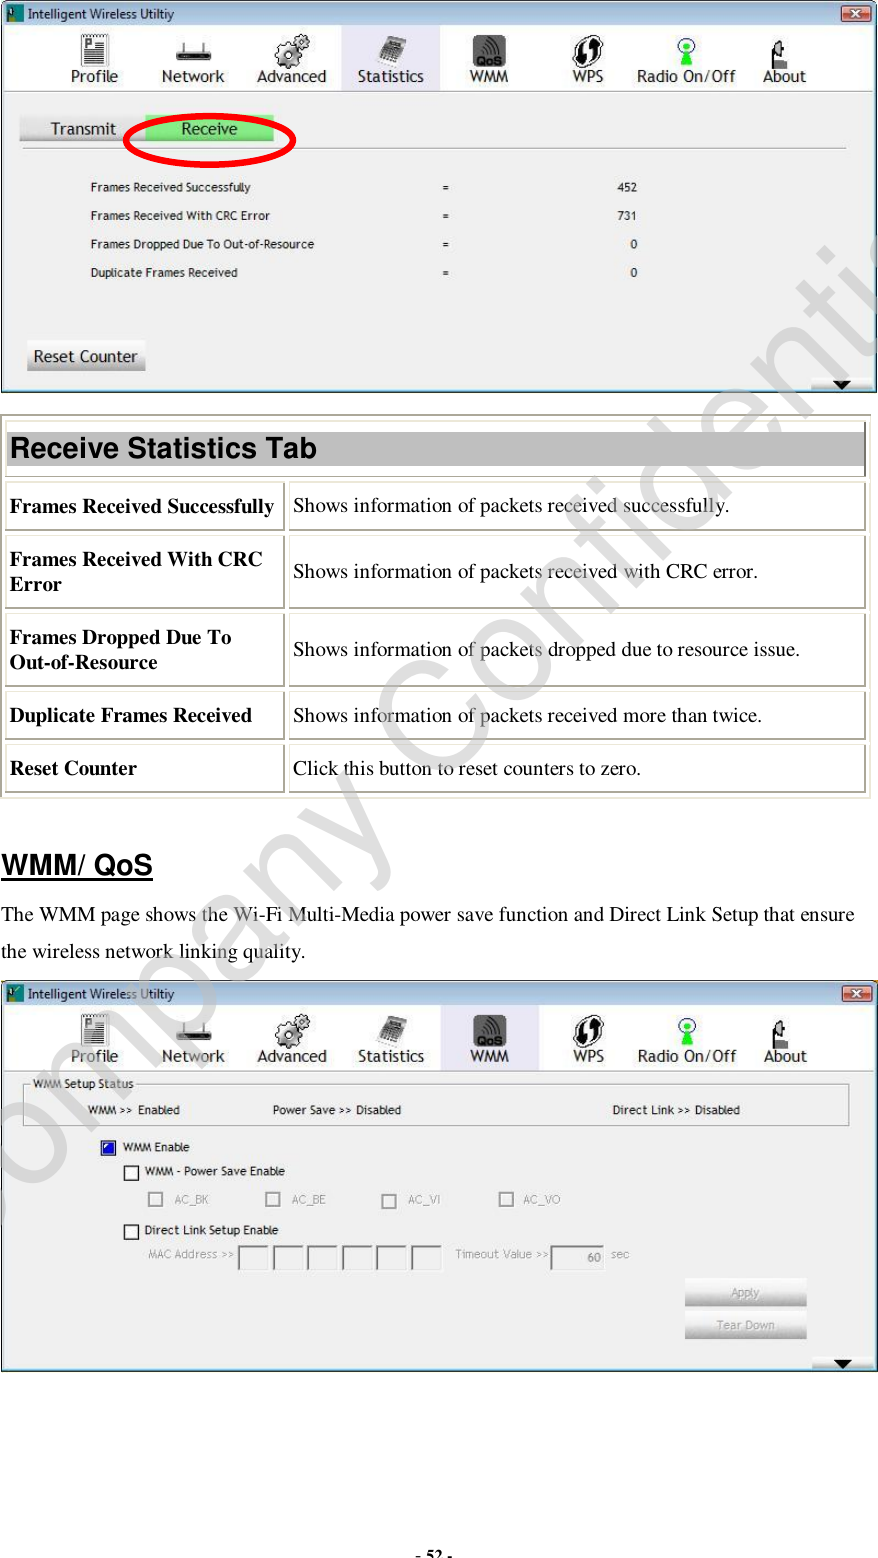  - 52 -  Receive Statistics Tab Frames Received Successfully Shows information of packets received successfully. Frames Received With CRC Error  Shows information of packets received with CRC error. Frames Dropped Due To Out-of-Resource  Shows information of packets dropped due to resource issue. Duplicate Frames Received  Shows information of packets received more than twice. Reset Counter  Click this button to reset counters to zero.  WMM/ QoS The WMM page shows the Wi-Fi Multi-Media power save function and Direct Link Setup that ensure the wireless network linking quality.  Company Confidential